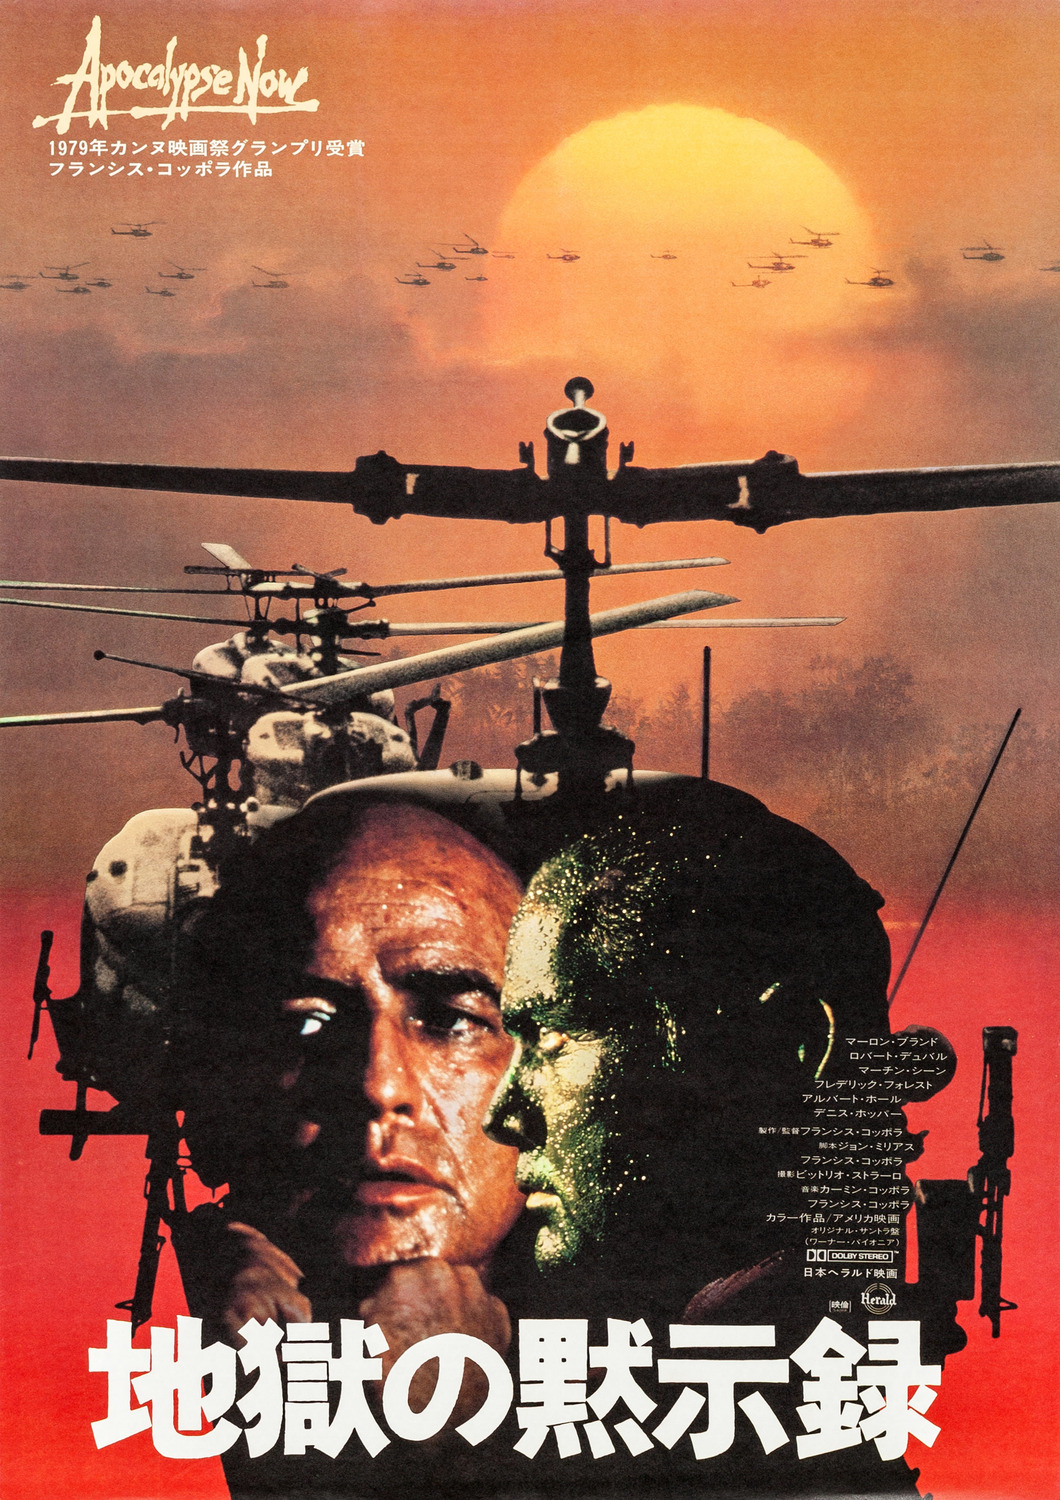 Extra Large Movie Poster Image for Apocalypse Now (#11 of 11)